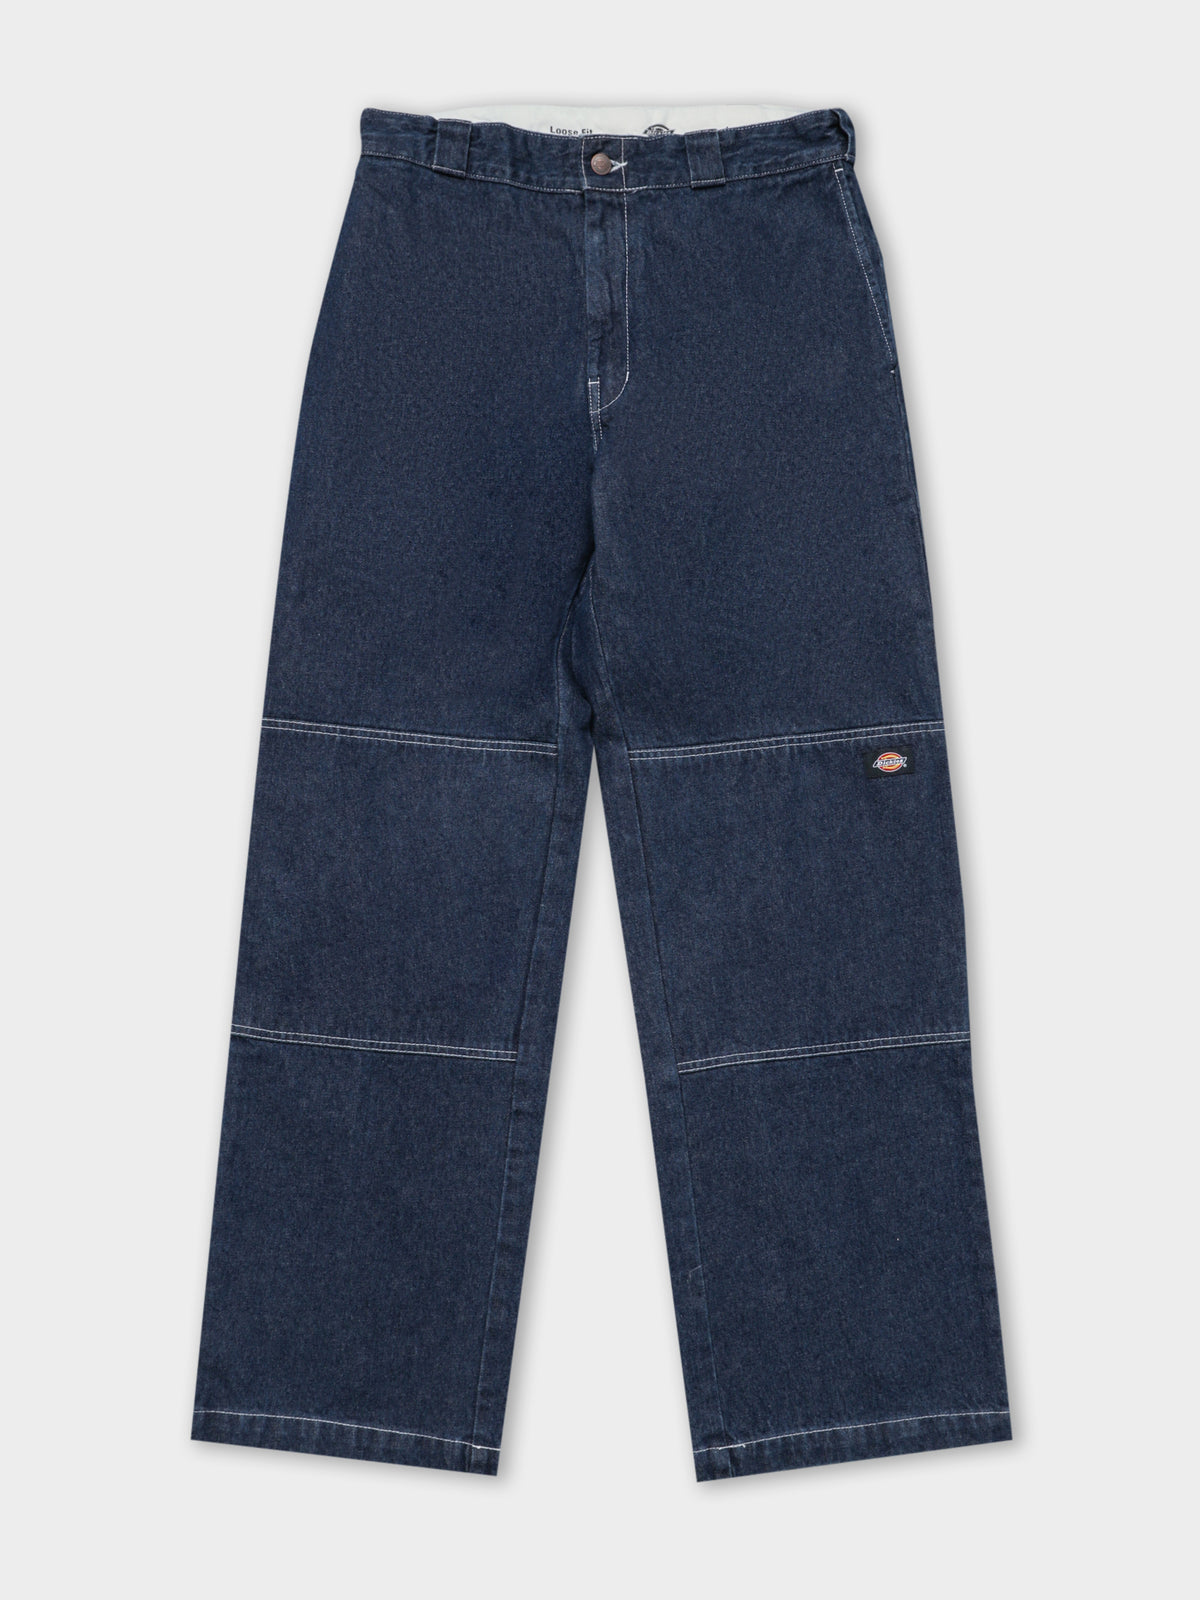 85-283AU Double Knee Jeans in Rinsed Indigo Blue